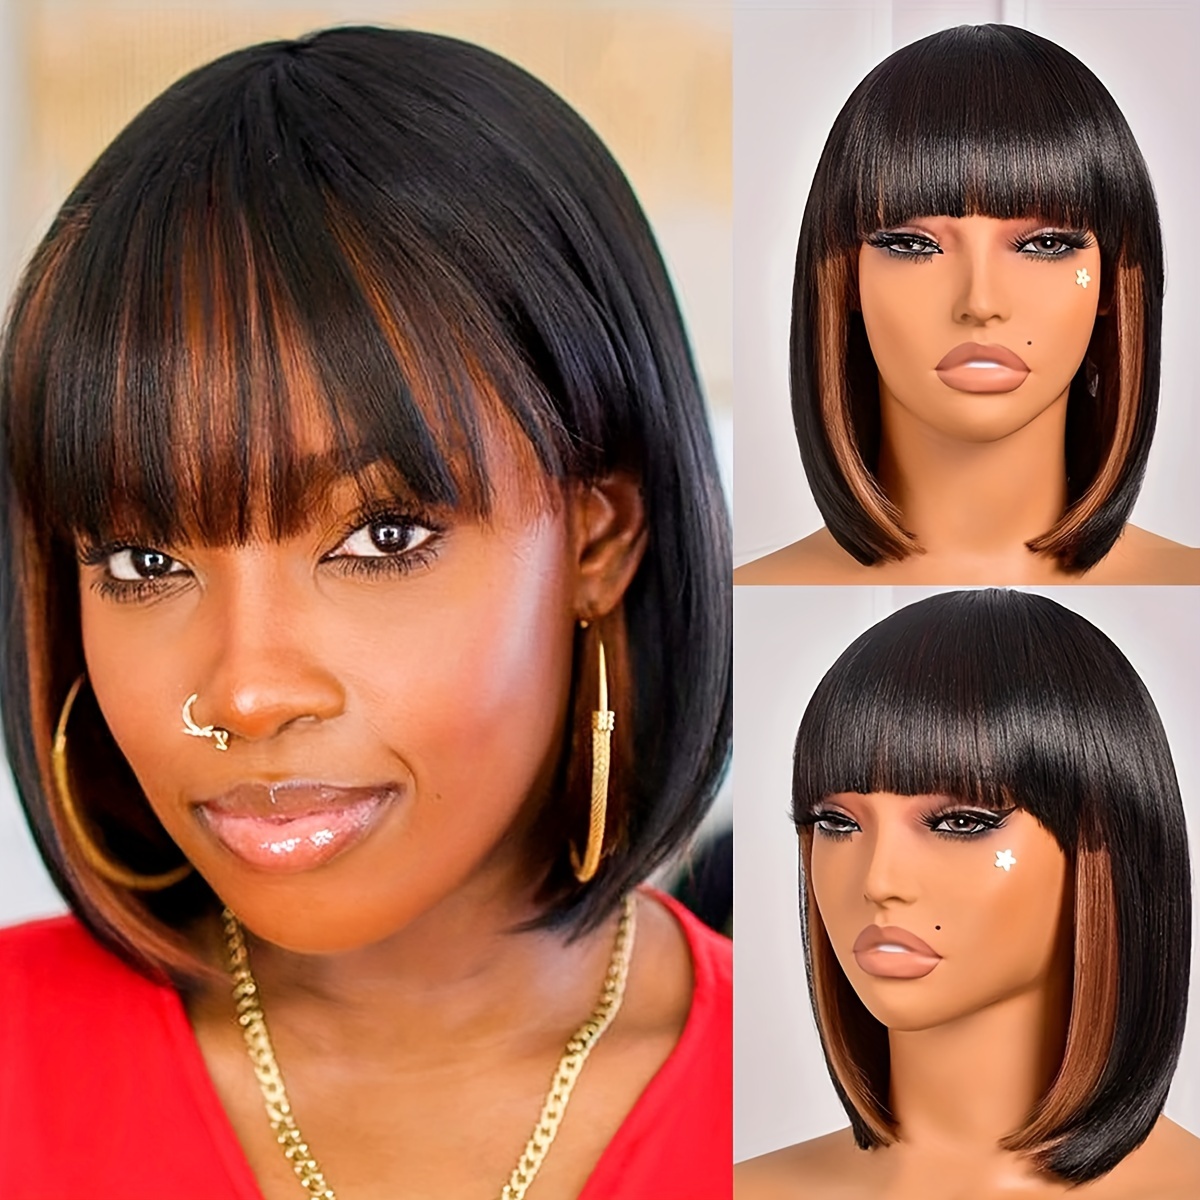 

Woven Wigs Elegant Short Bob With Bangs For Women - Yaki Straight Synthetic Wig, Heat Resistant High Temperature Fiber, Rose Net Cap, Universal Fit